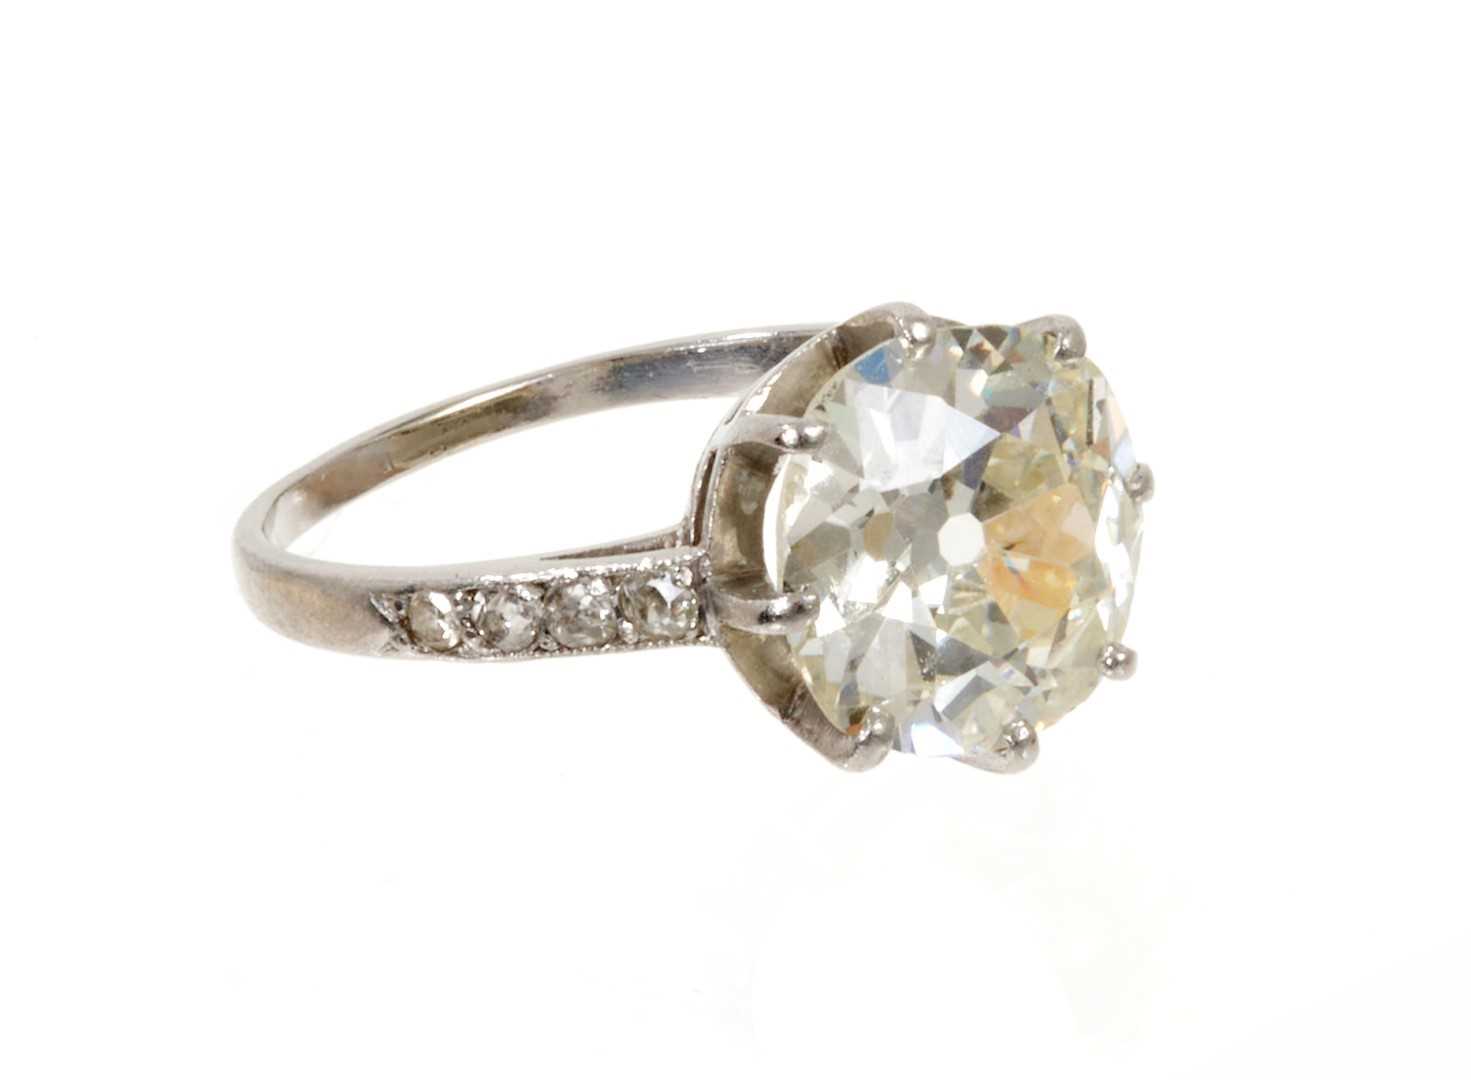 Lot 632 - Diamond single stone ring with an old cut diamond weighing approximately 3.20cts